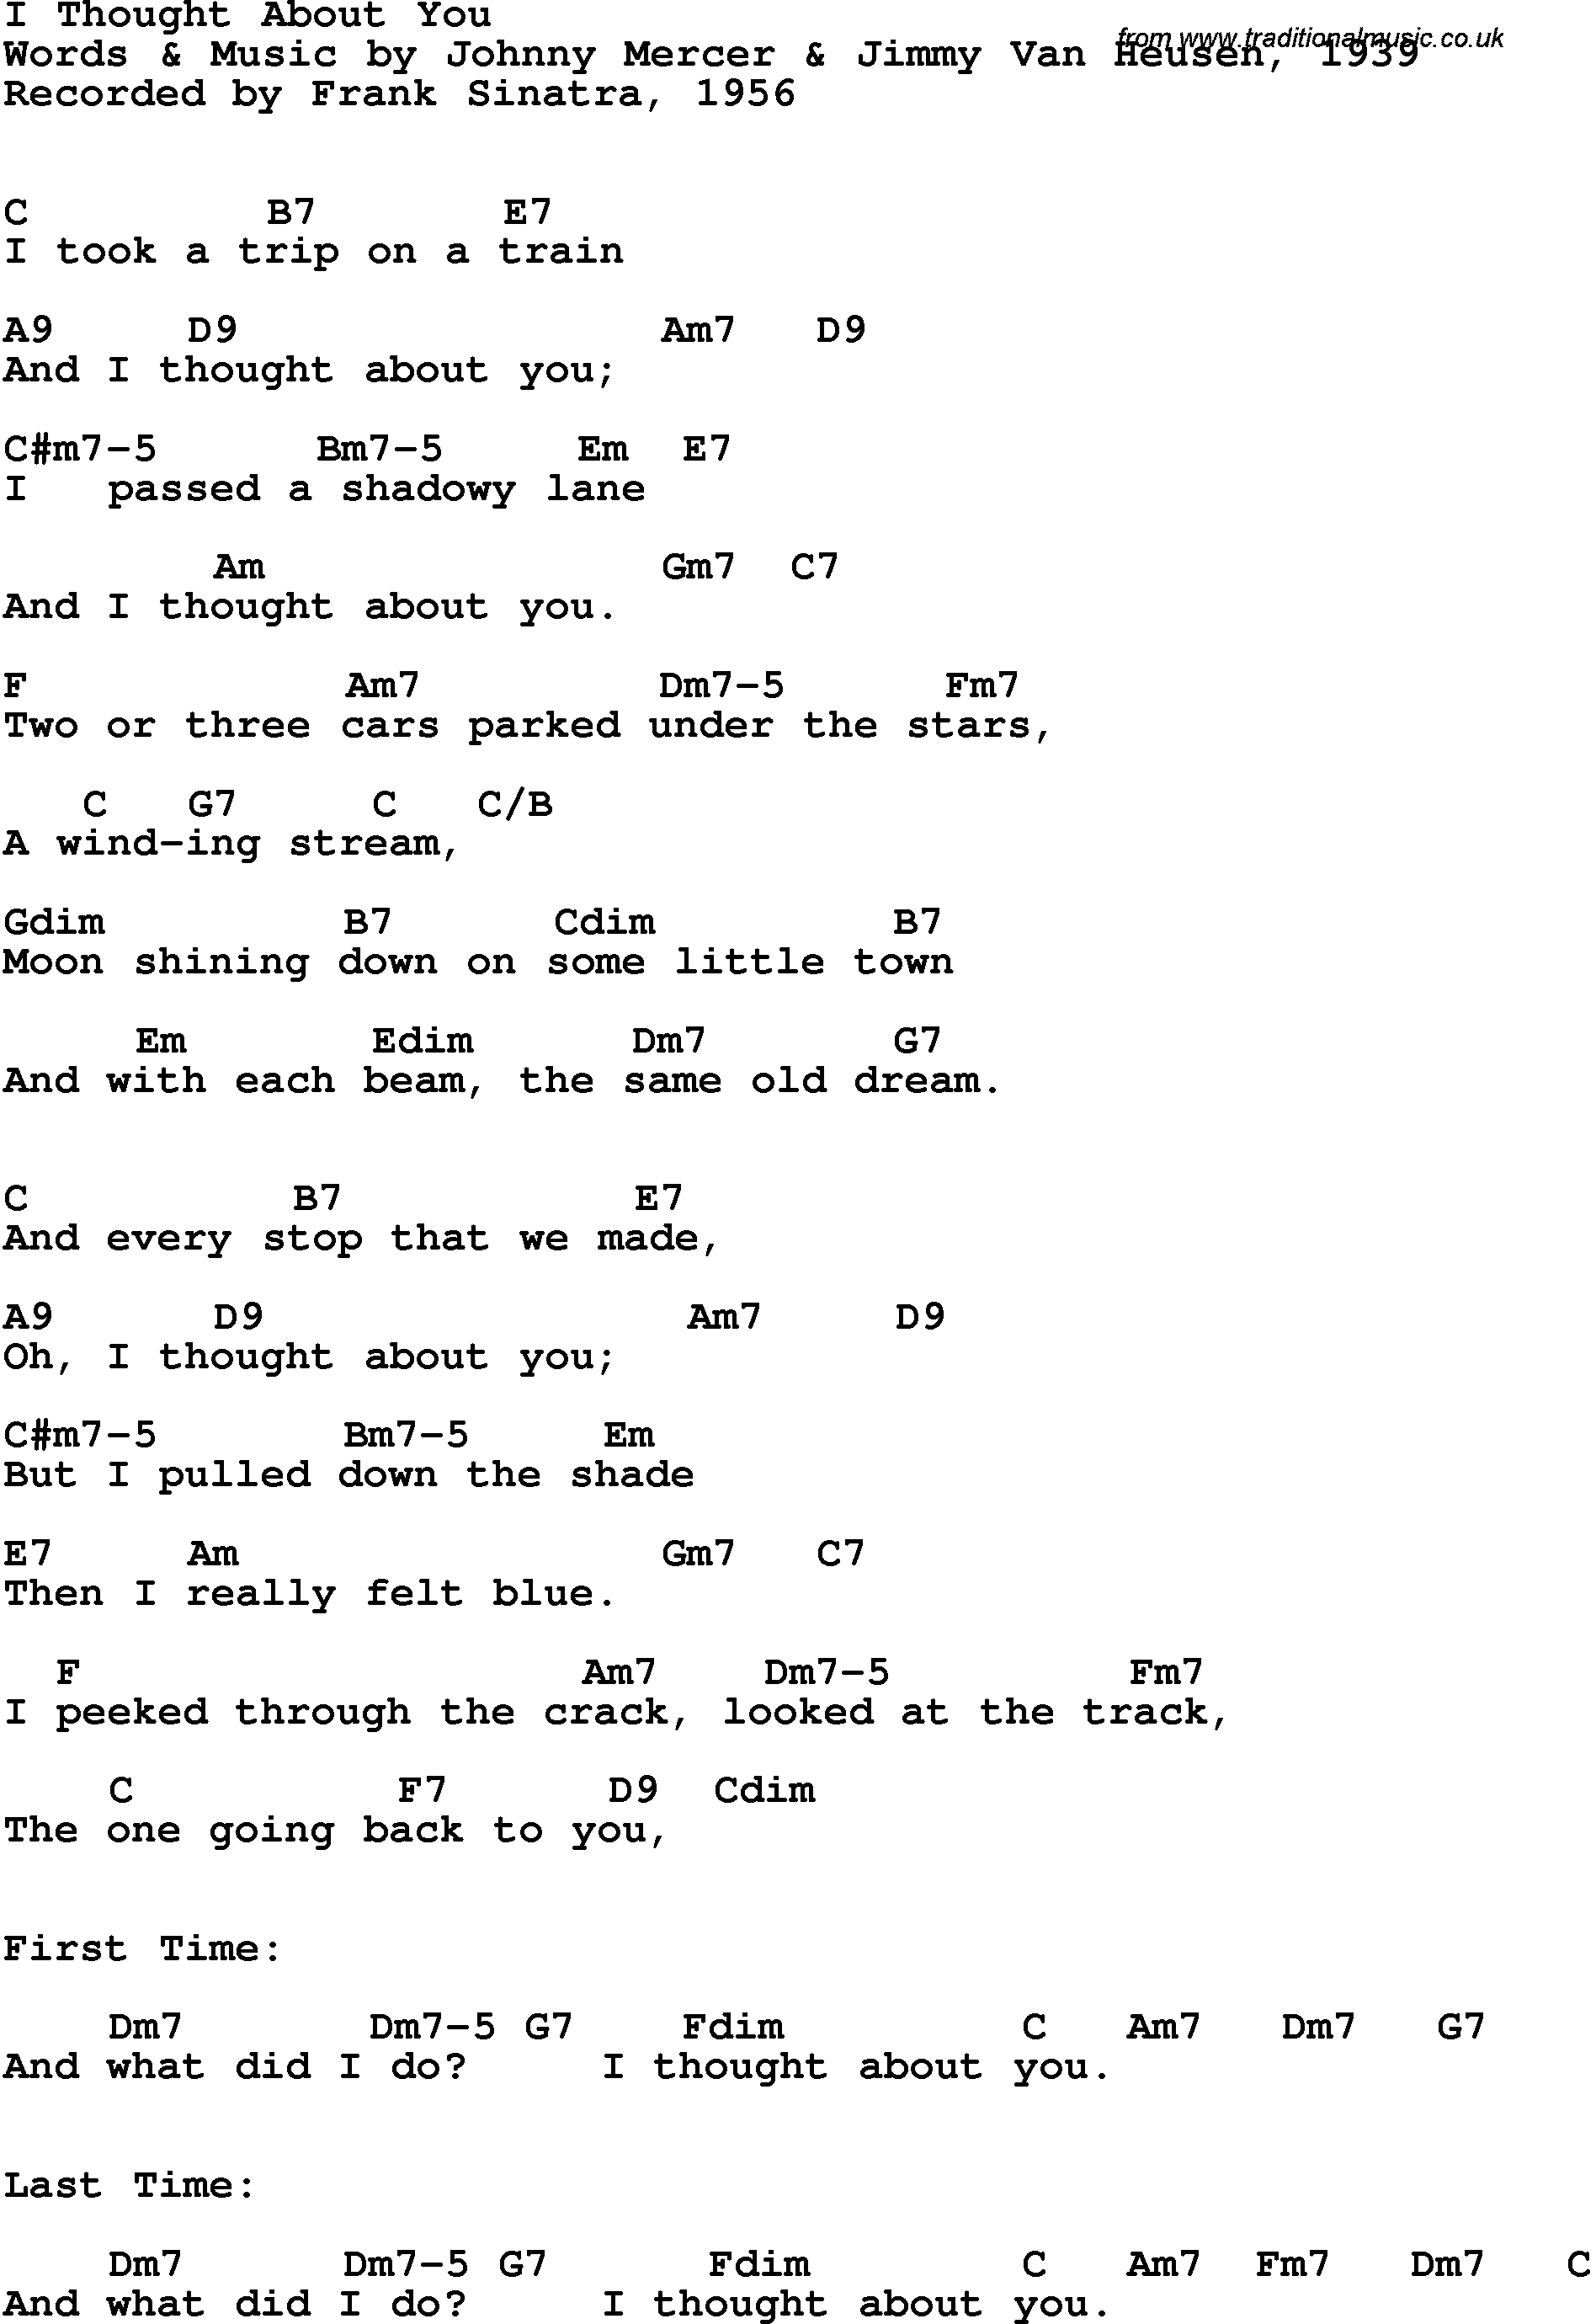 Song Lyrics with guitar chords for I Thought About You - Frank Sinatra, 1956